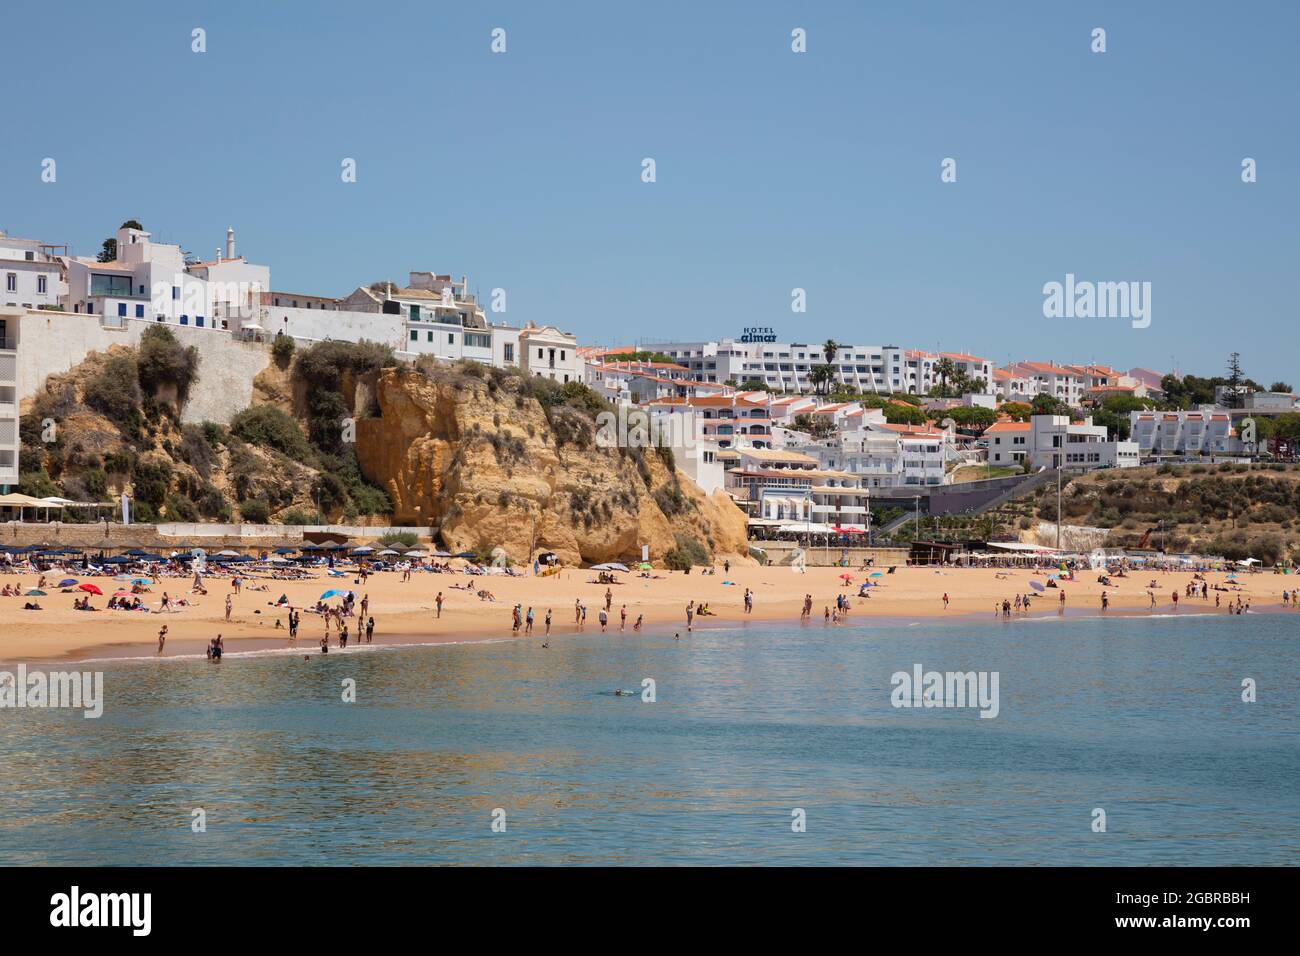 geography / travel, Portugal, Algarve, Atlantic Ocean coast, Albufeira, townscape, sandy beach, ADDITIONAL-RIGHTS-CLEARANCE-INFO-NOT-AVAILABLE Stock Photo